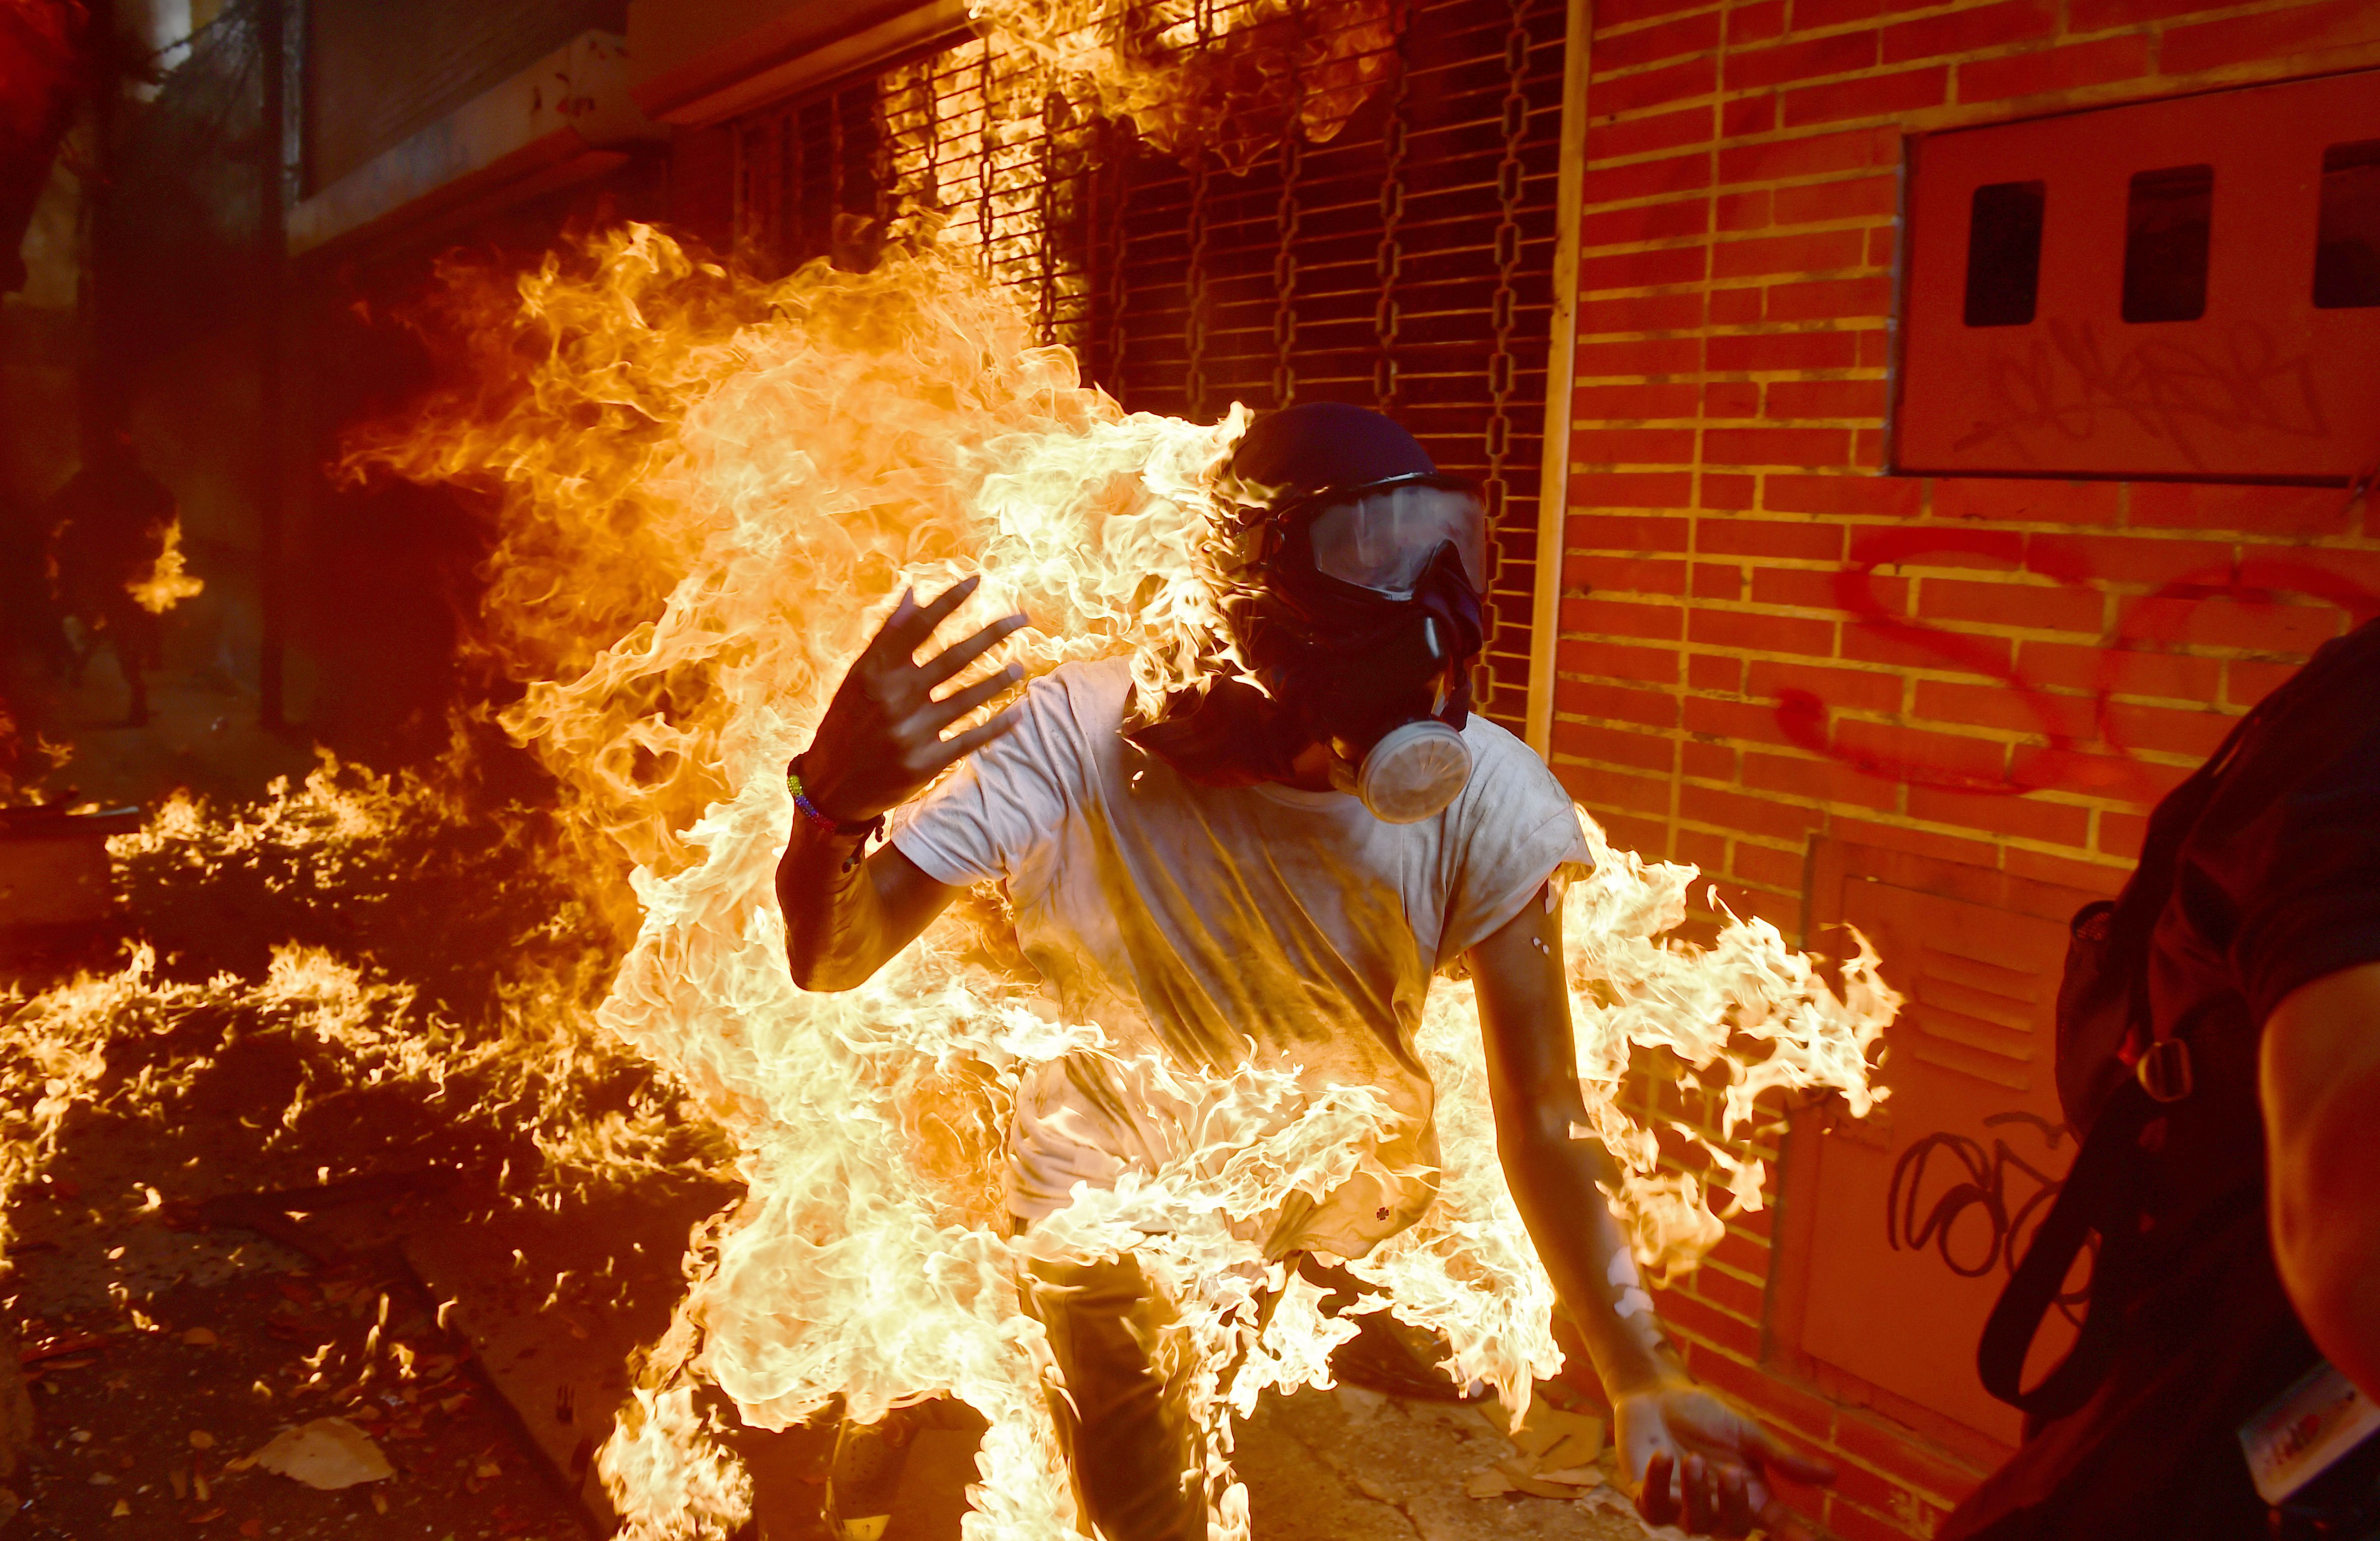 World Press Photo: Photograph of a man on fire wins top photo prize ...